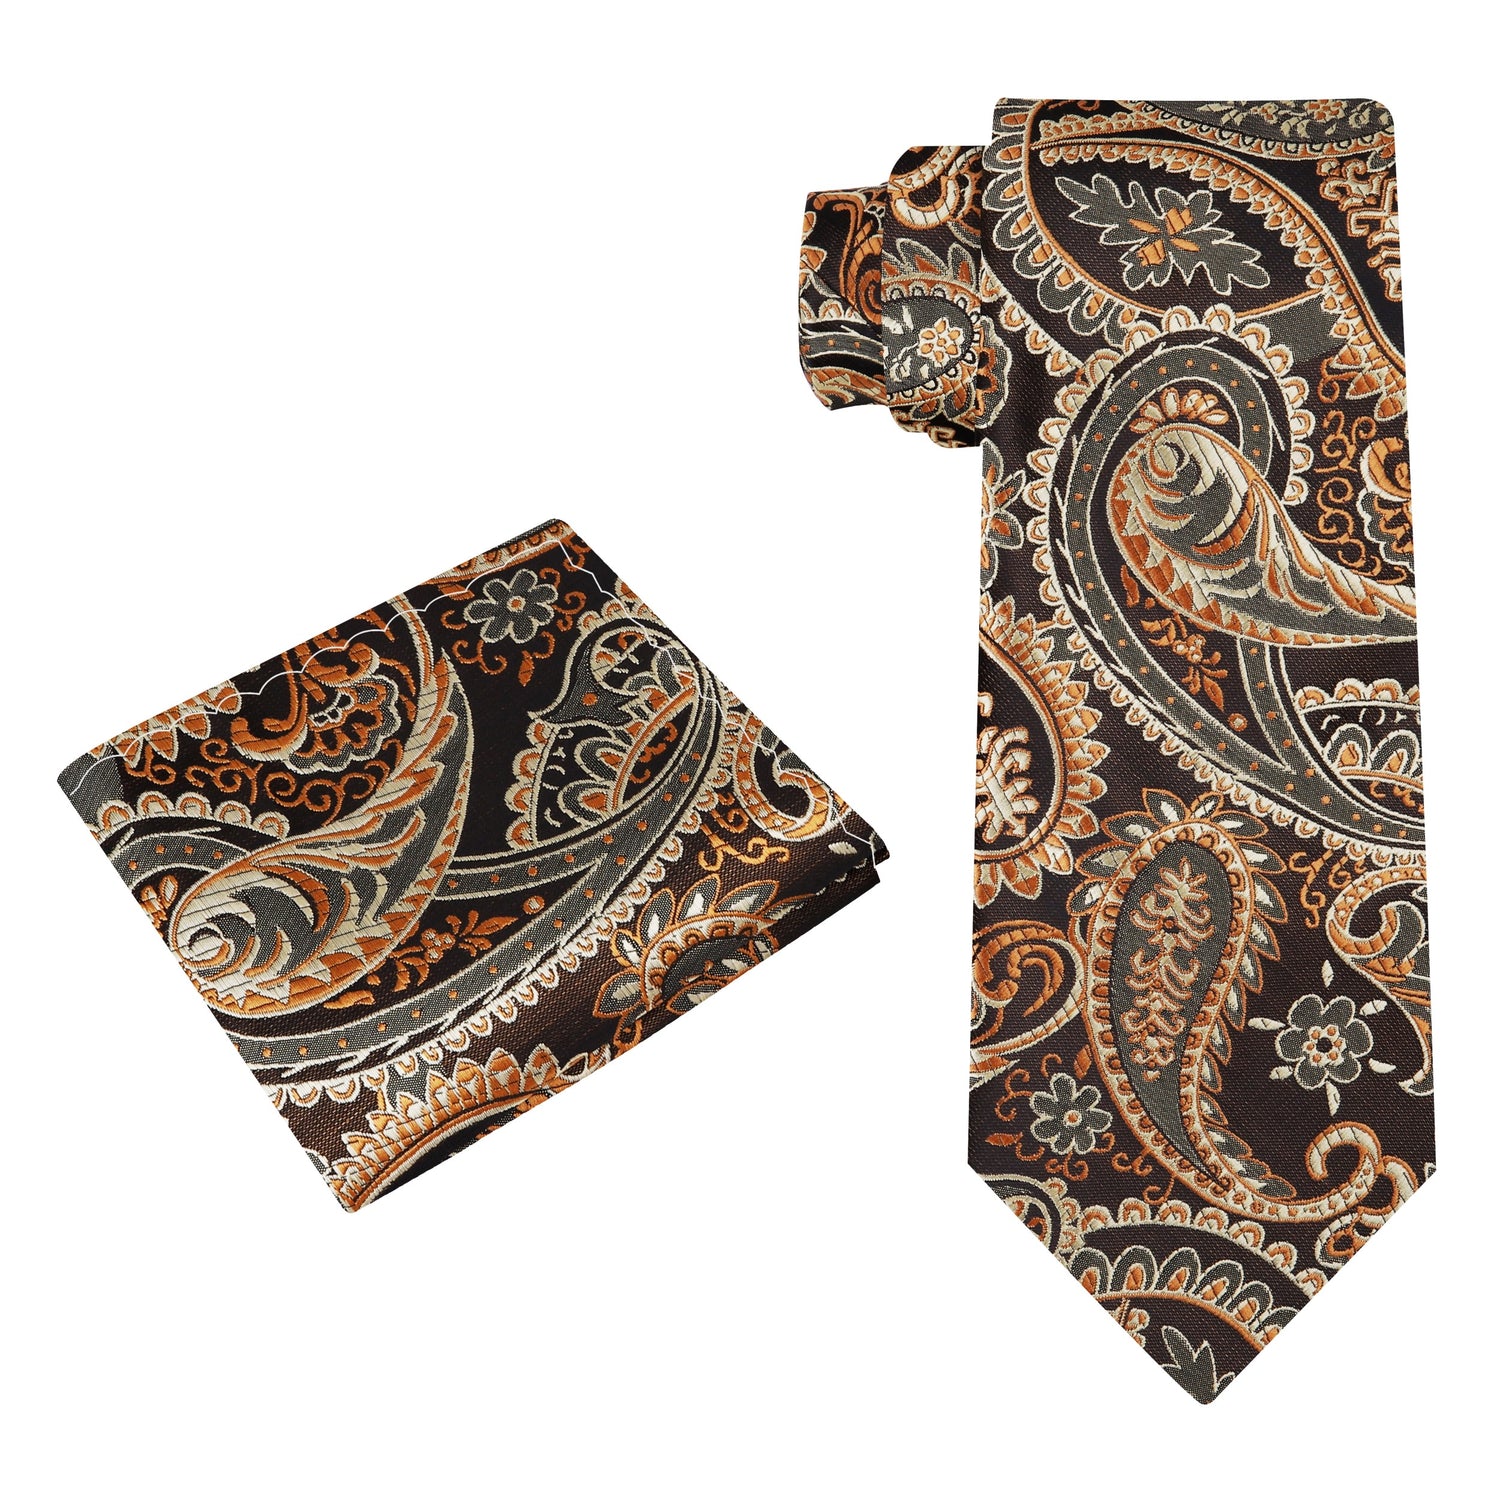 Alt View: Shades of Brown No Check Mahogany Paisley Silk Necktie and Square